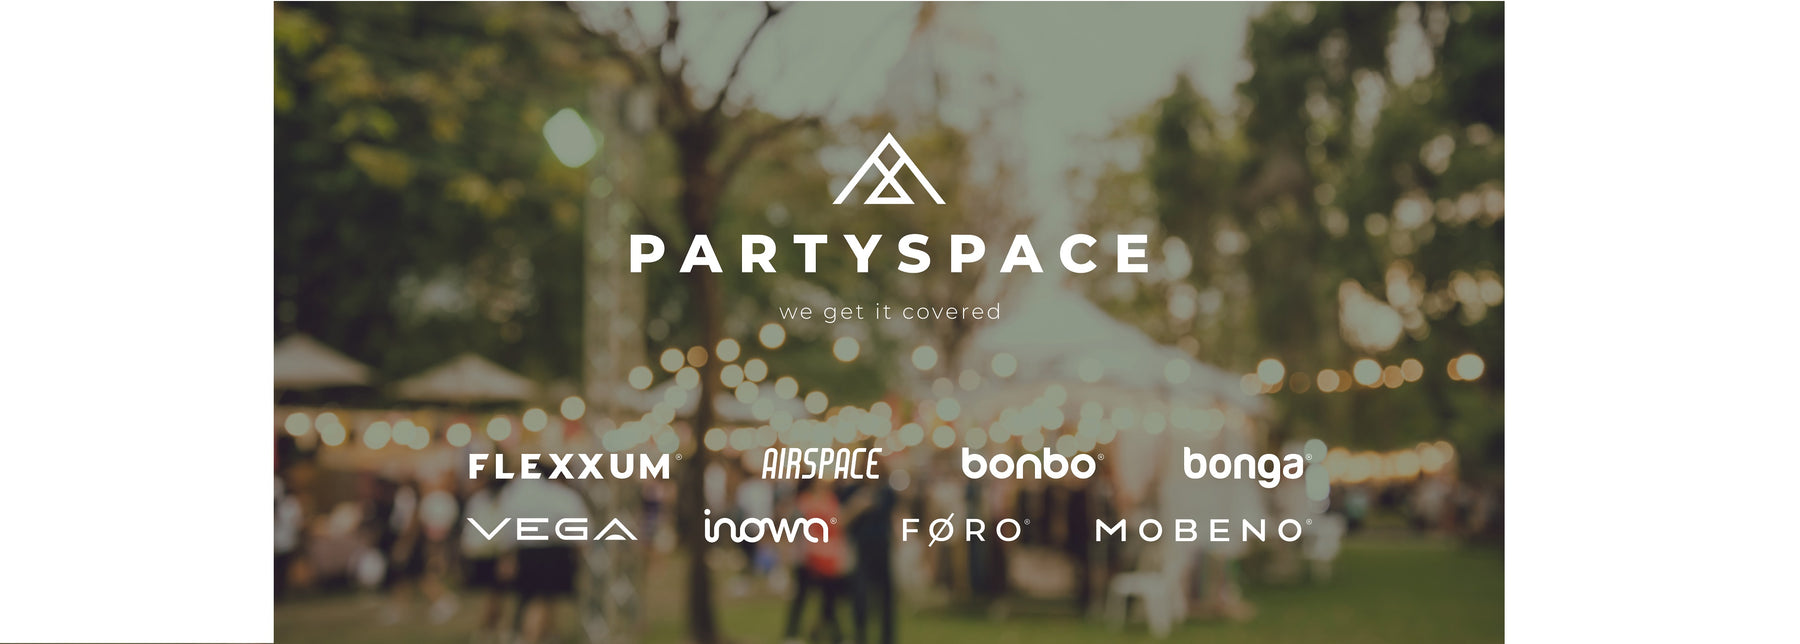 Do you know our Partyspace brands?